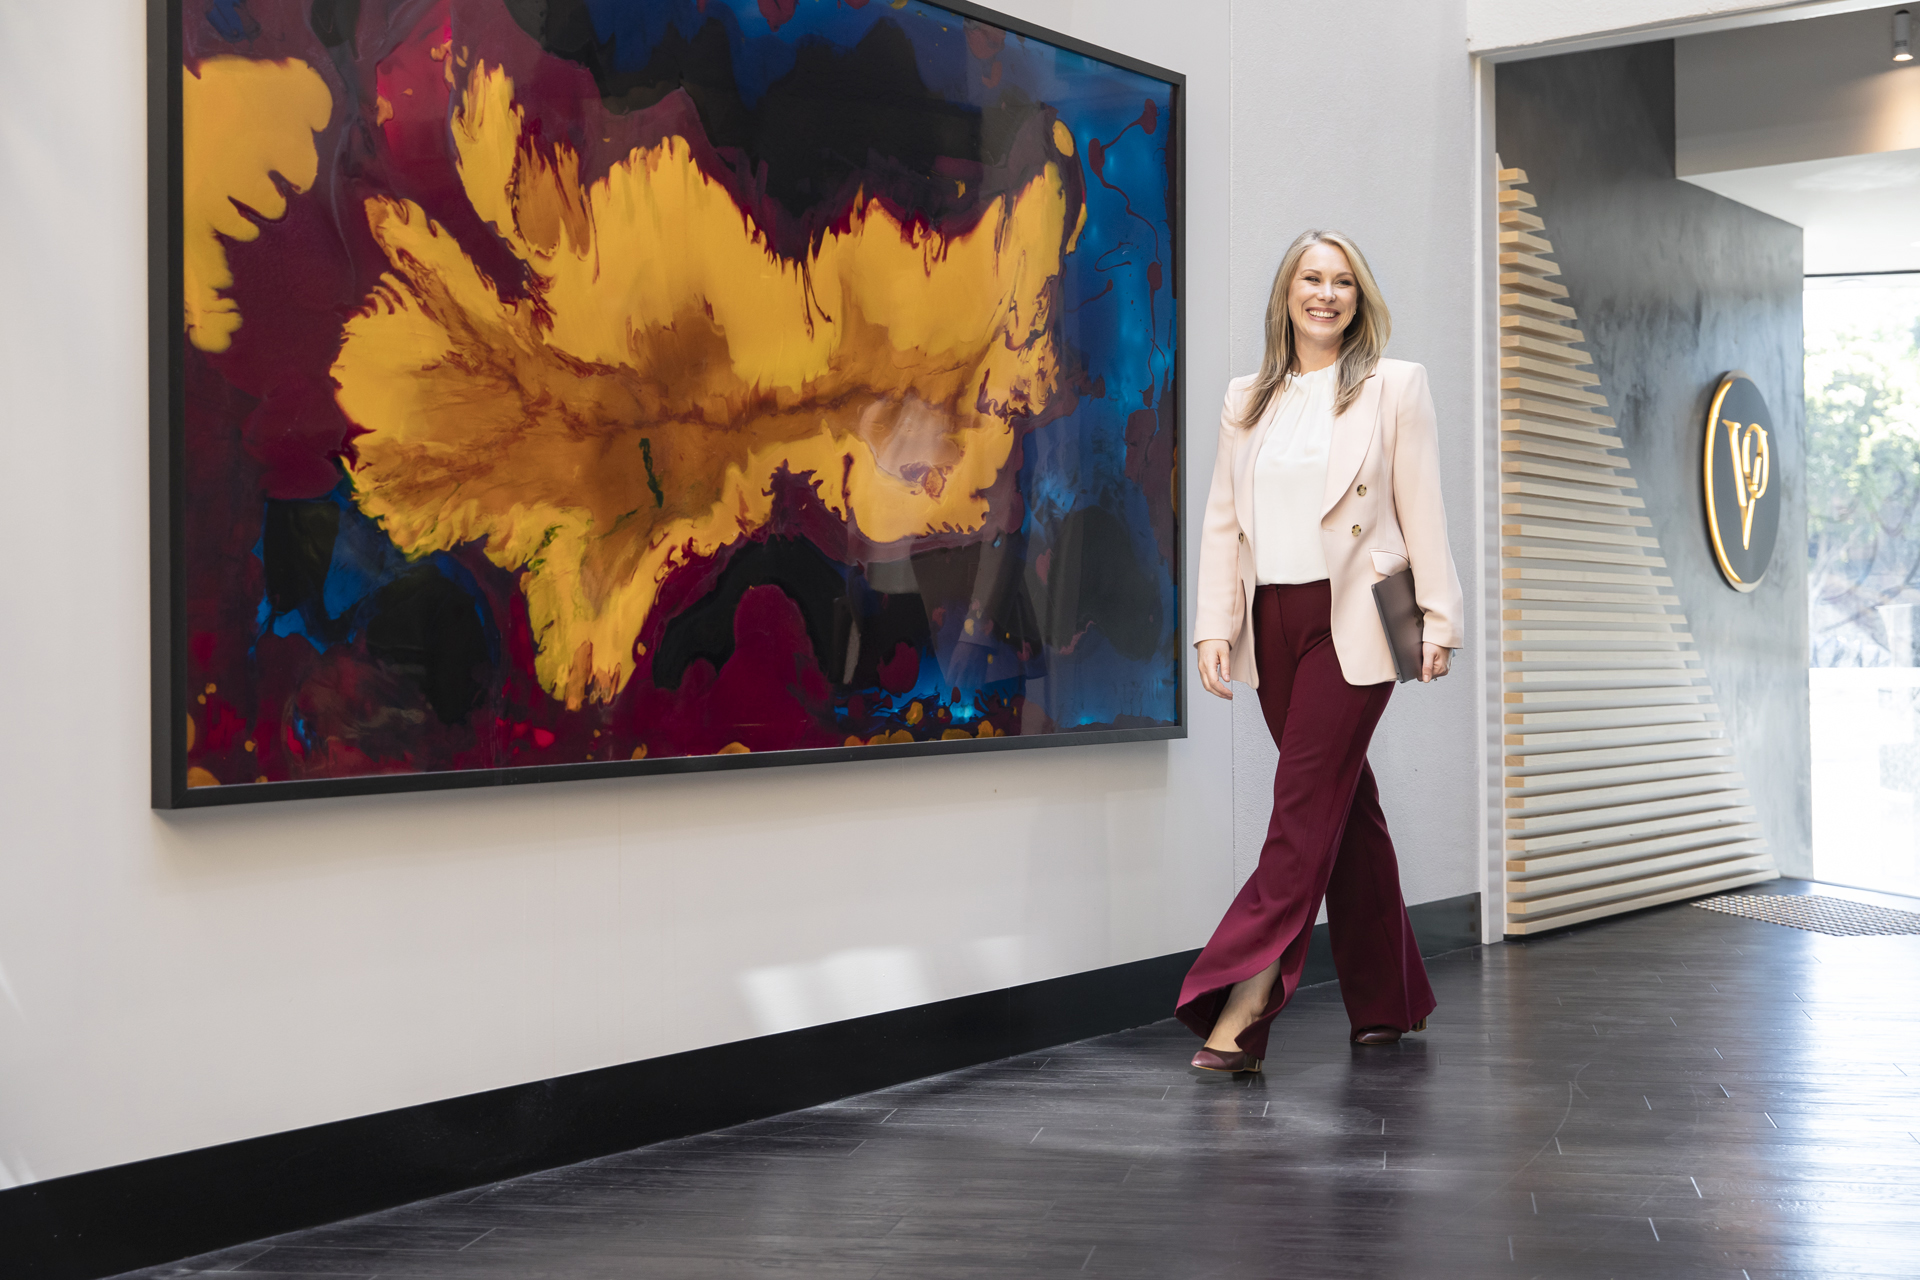 Business woman carrying laptop and walking past artwork